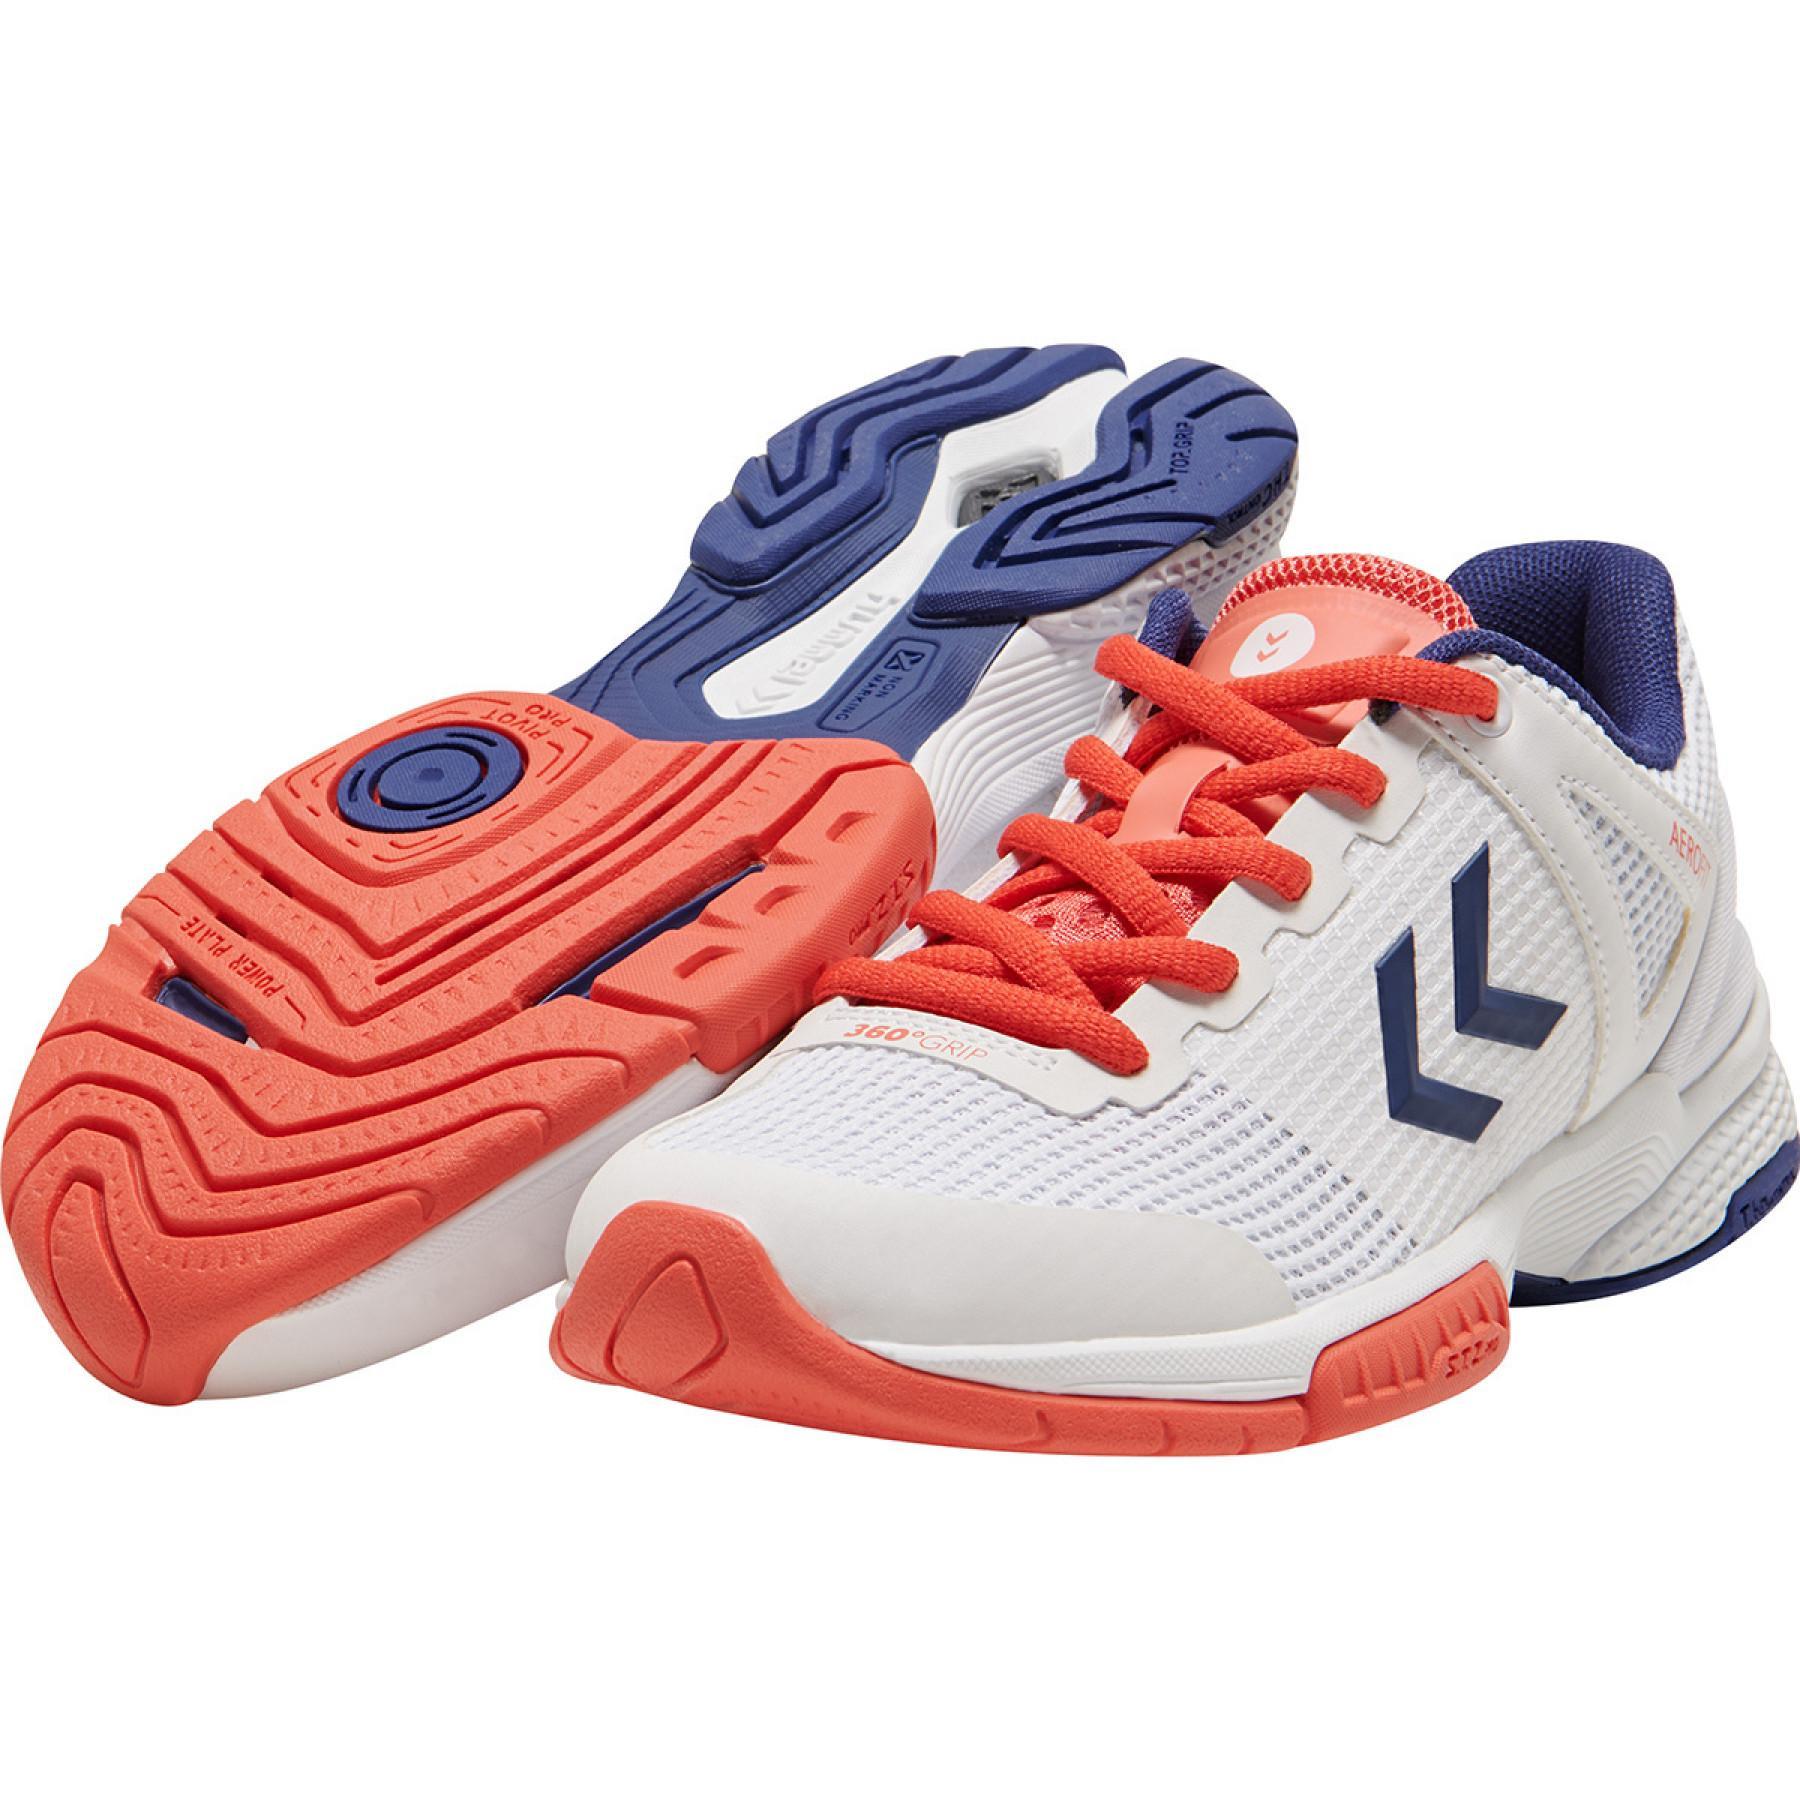 Chaussures femme Hummel aerocharge hb180 rely 3.0